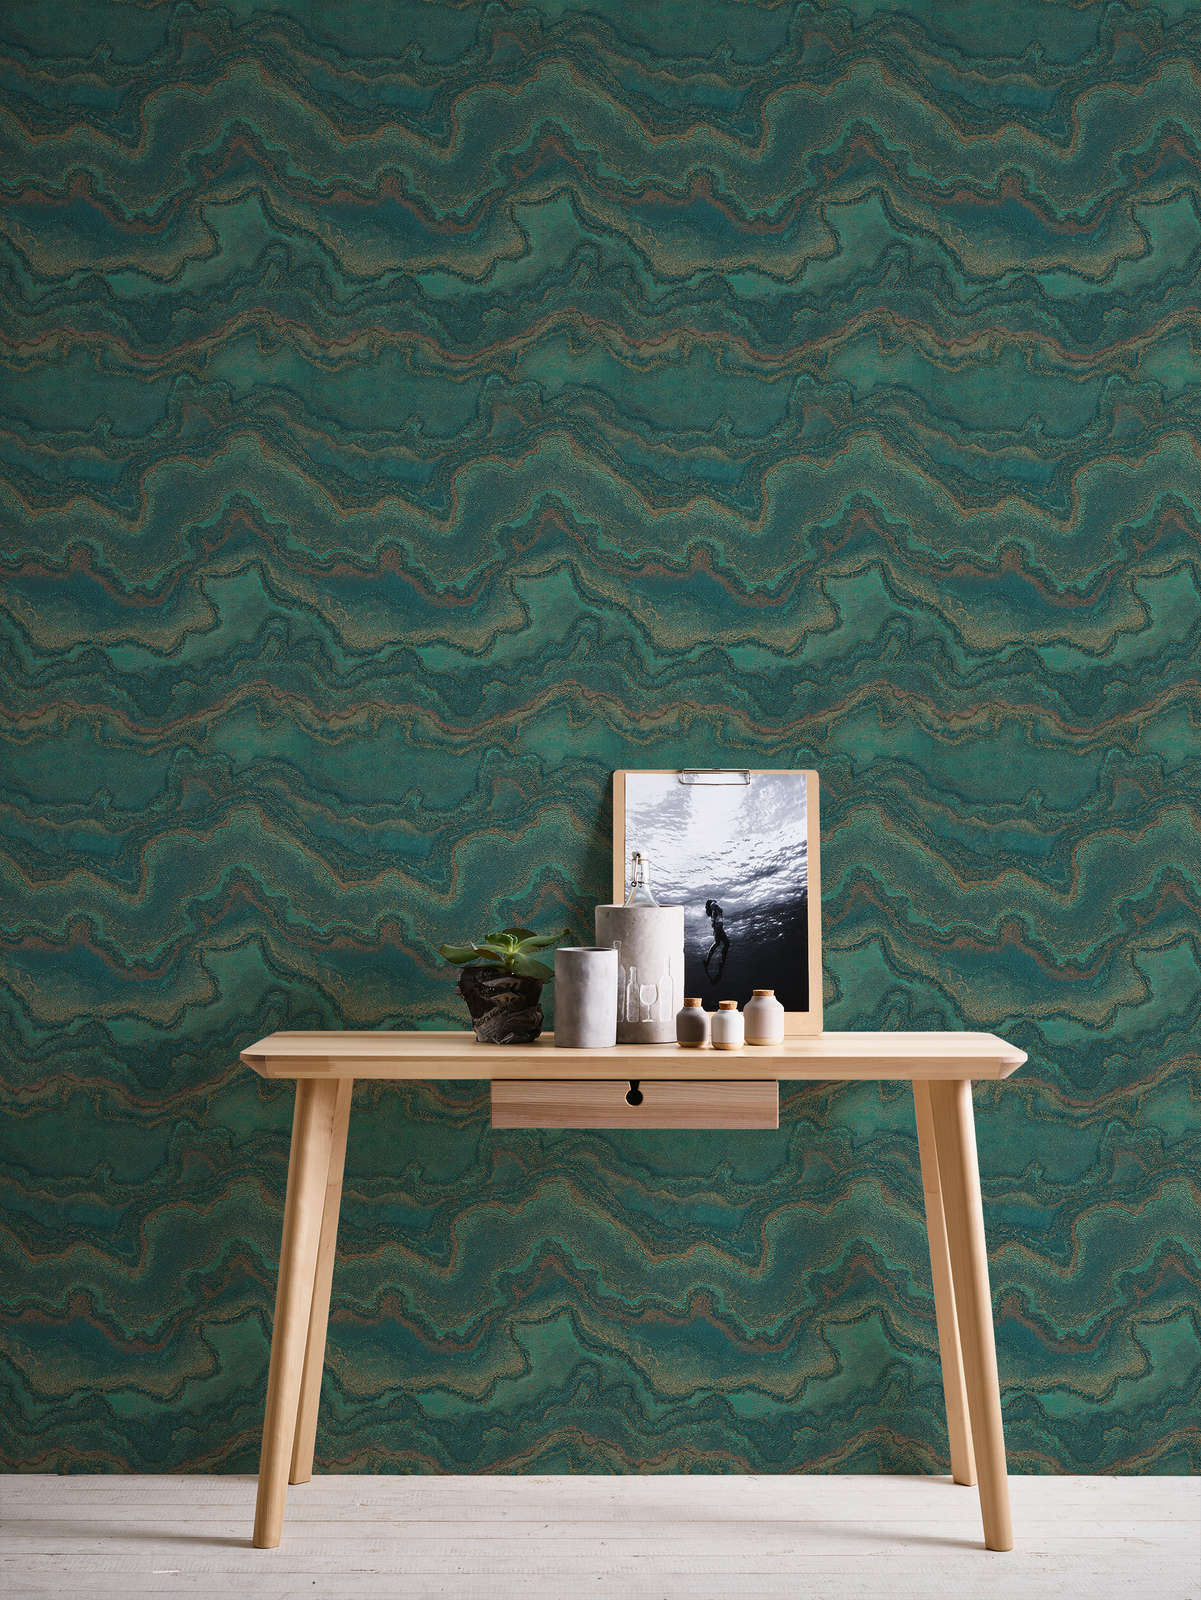             Non-woven wallpaper with a marbled look - green, petrol, gold
        